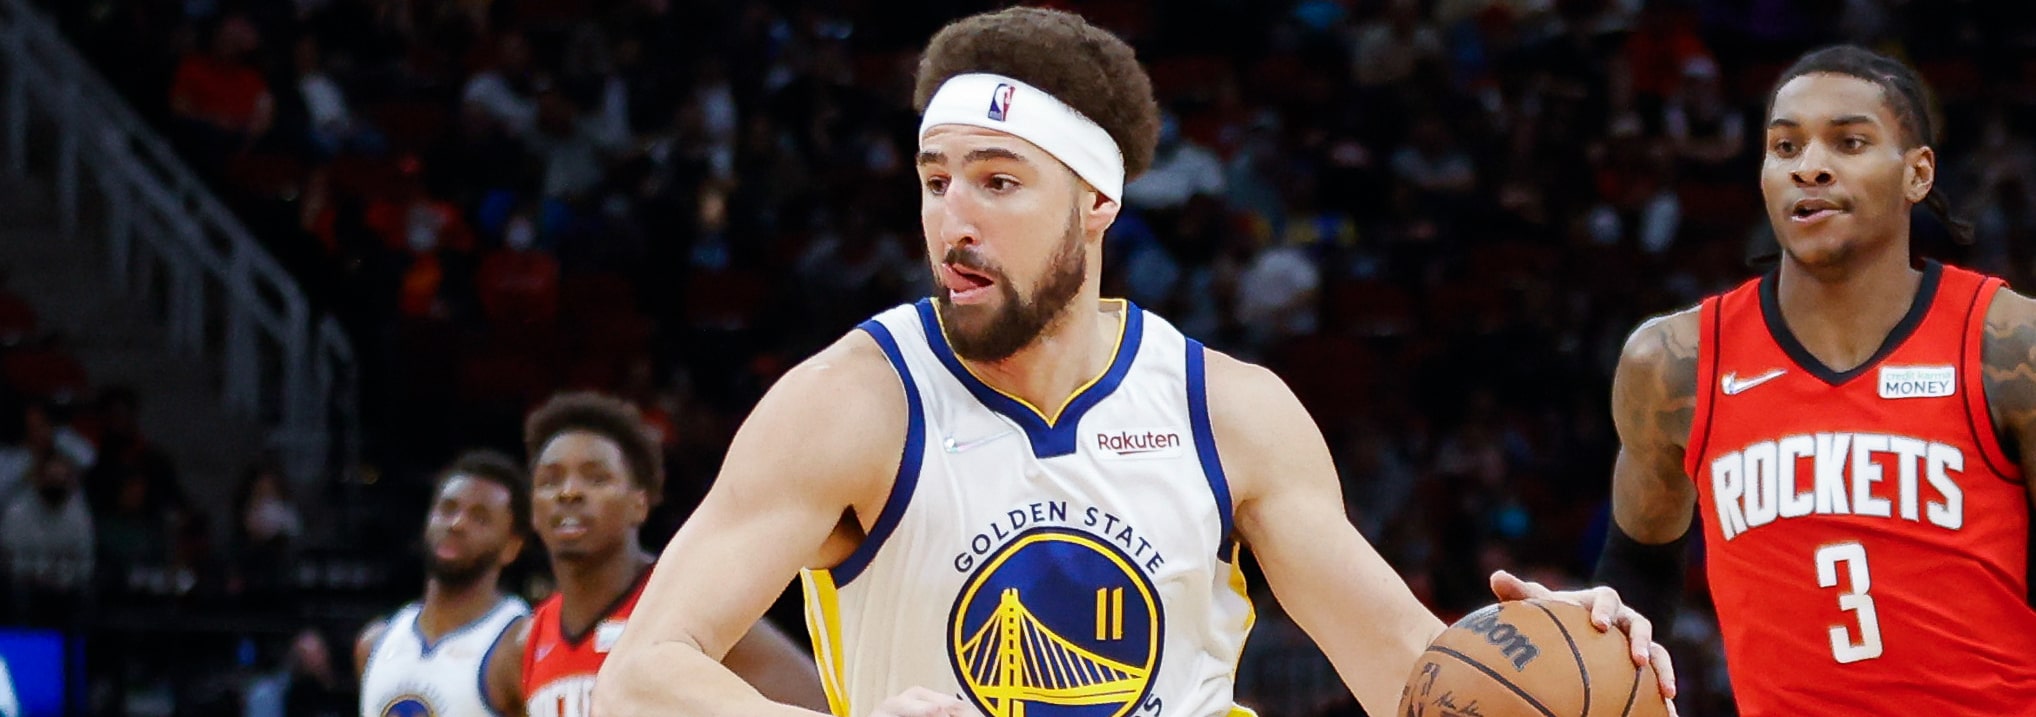 Klay Thompson Player Props: Three-Pointer Props and Odds vs. the